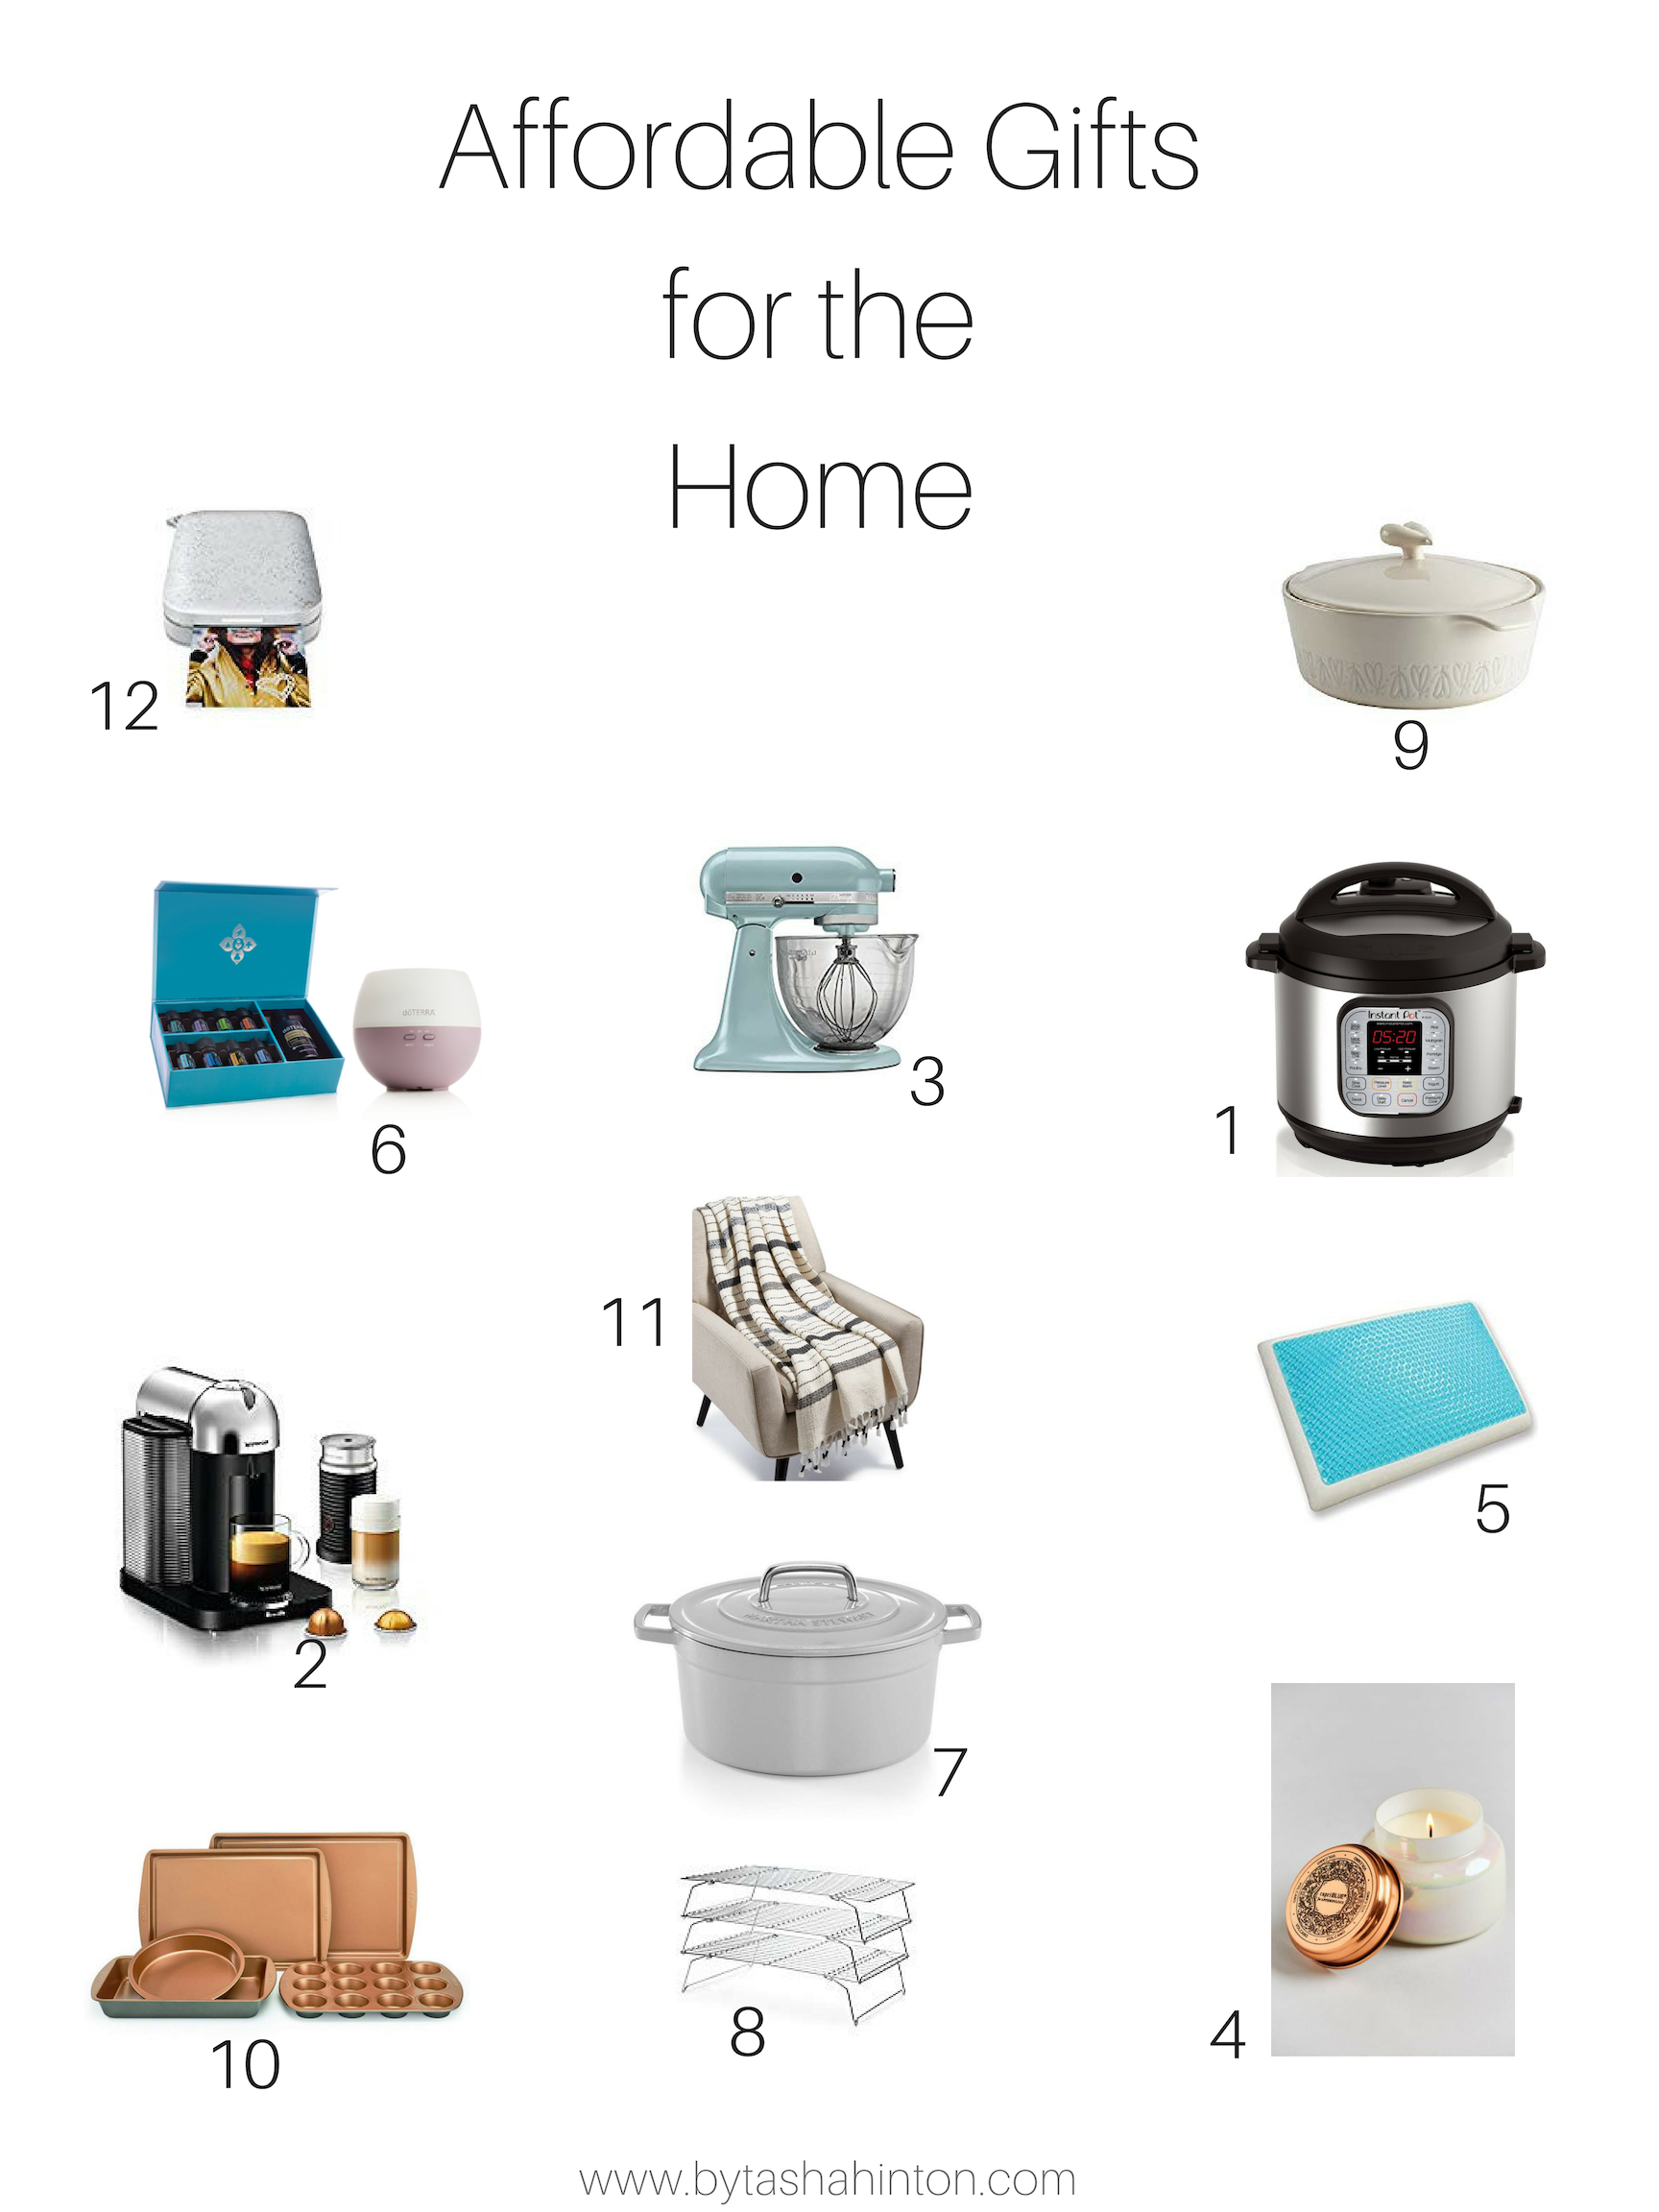 Affordable gifts options for the home